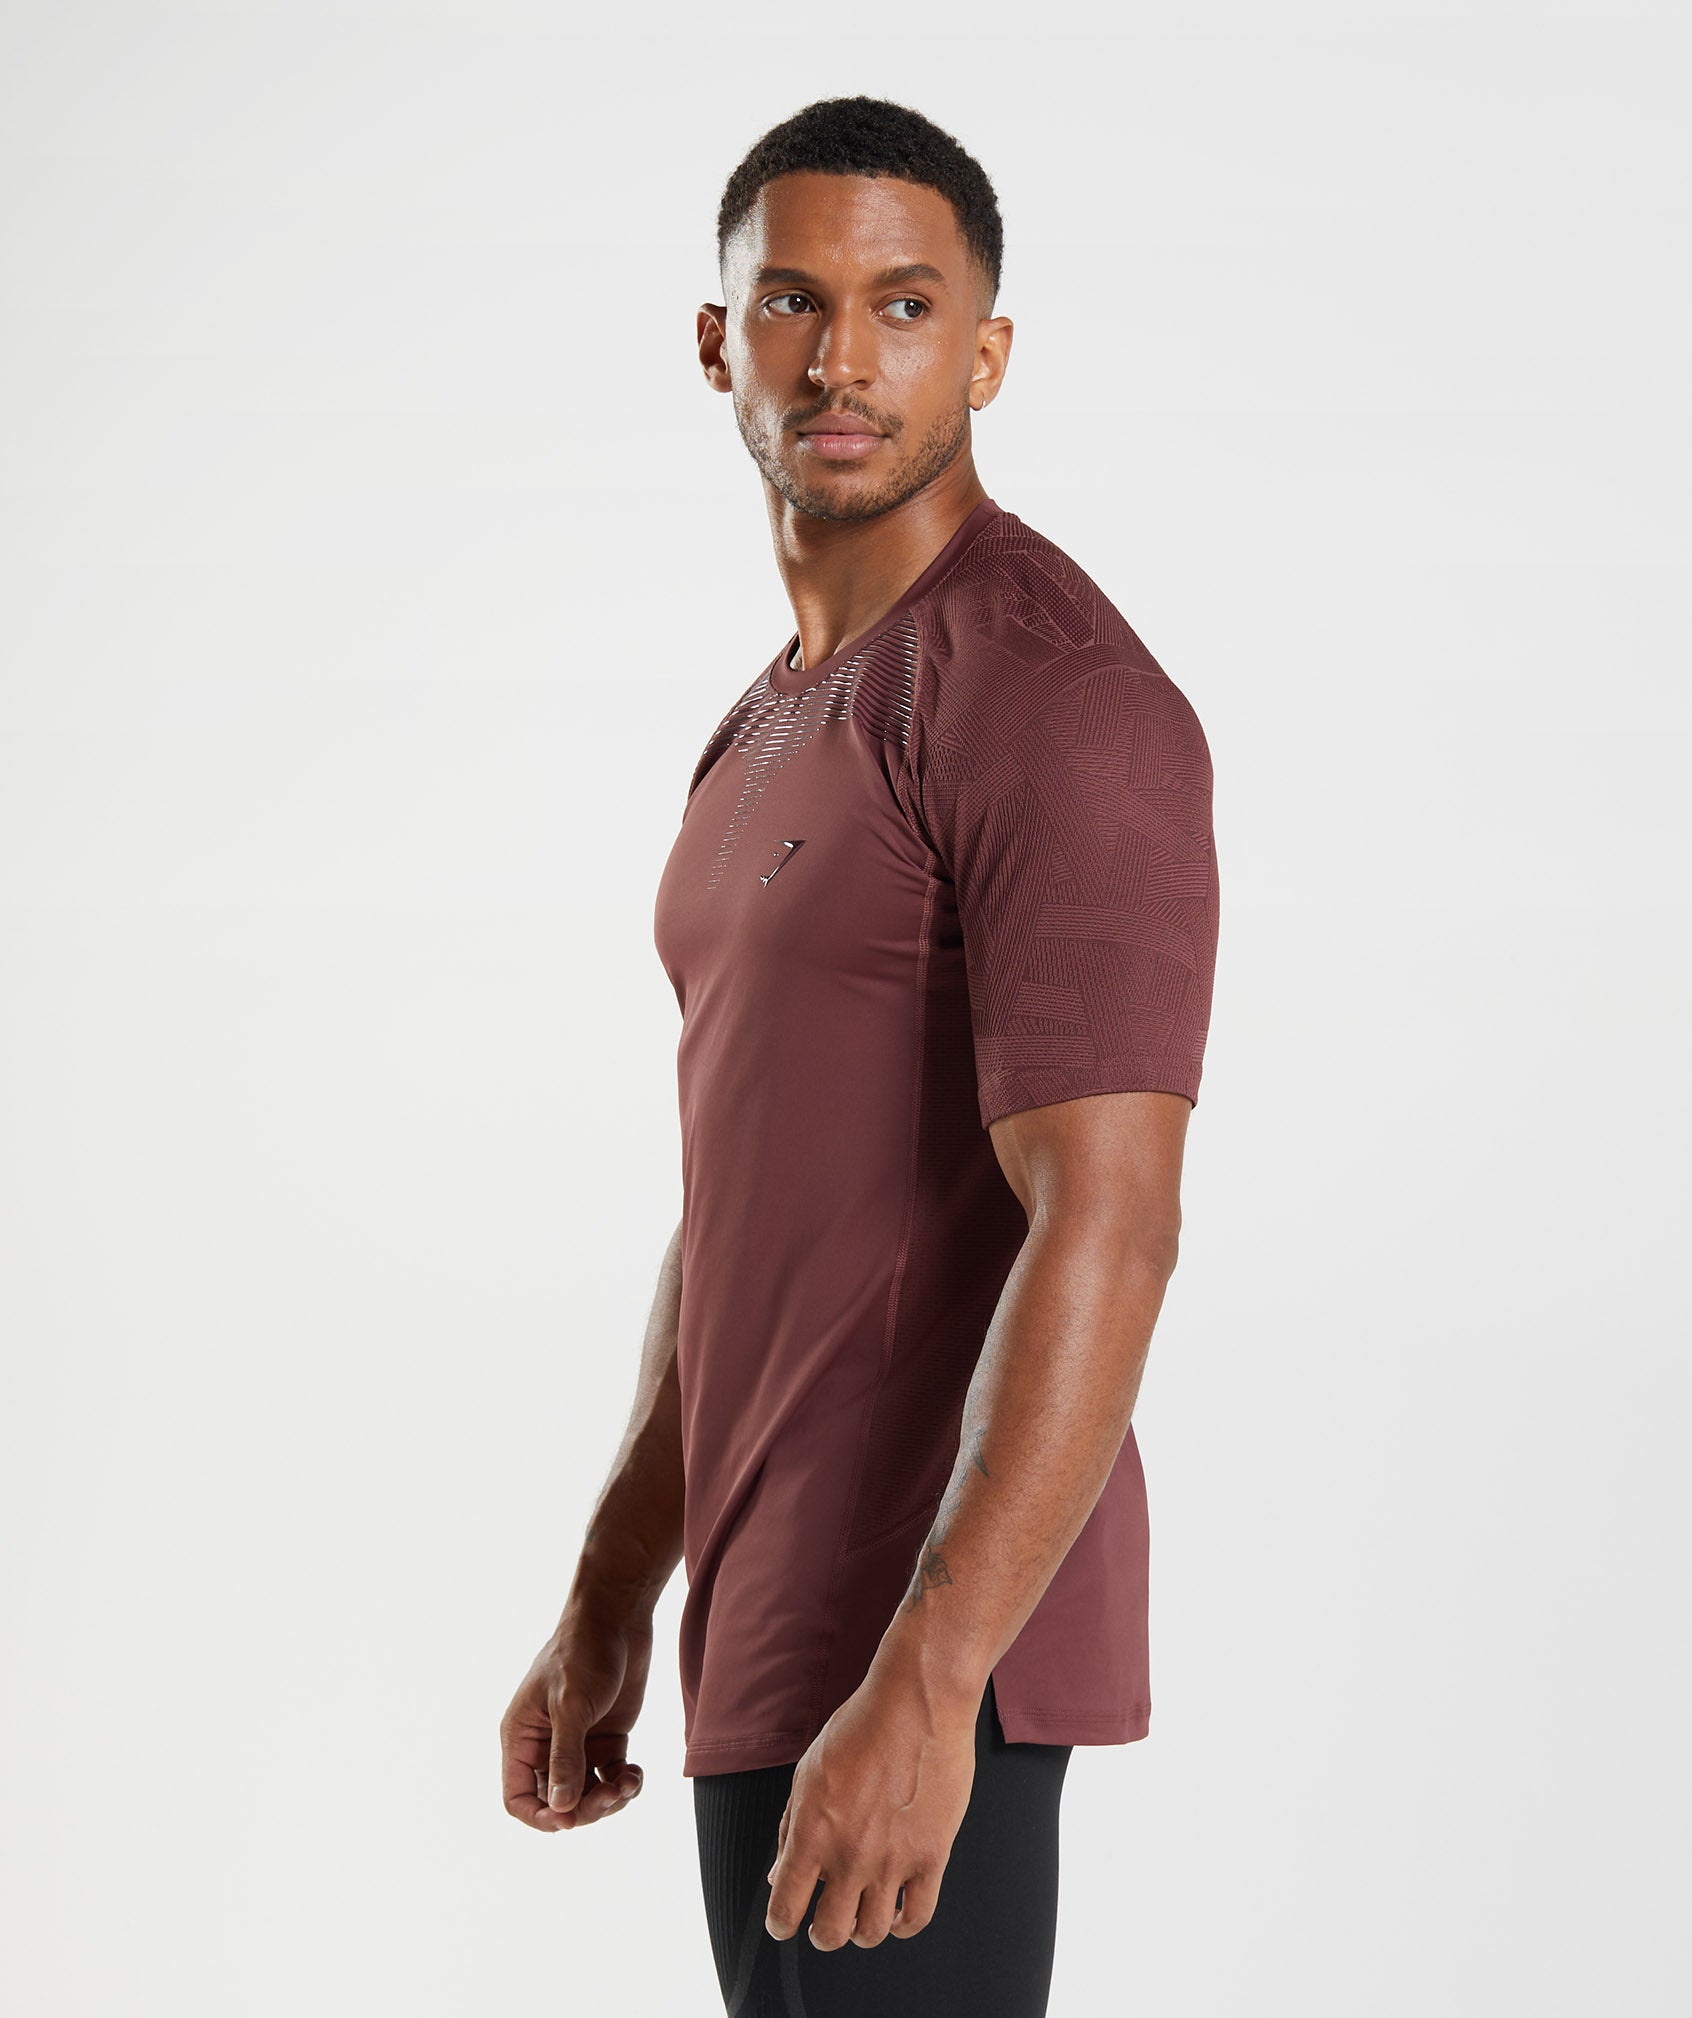 Form T-Shirt in Cherry Brown